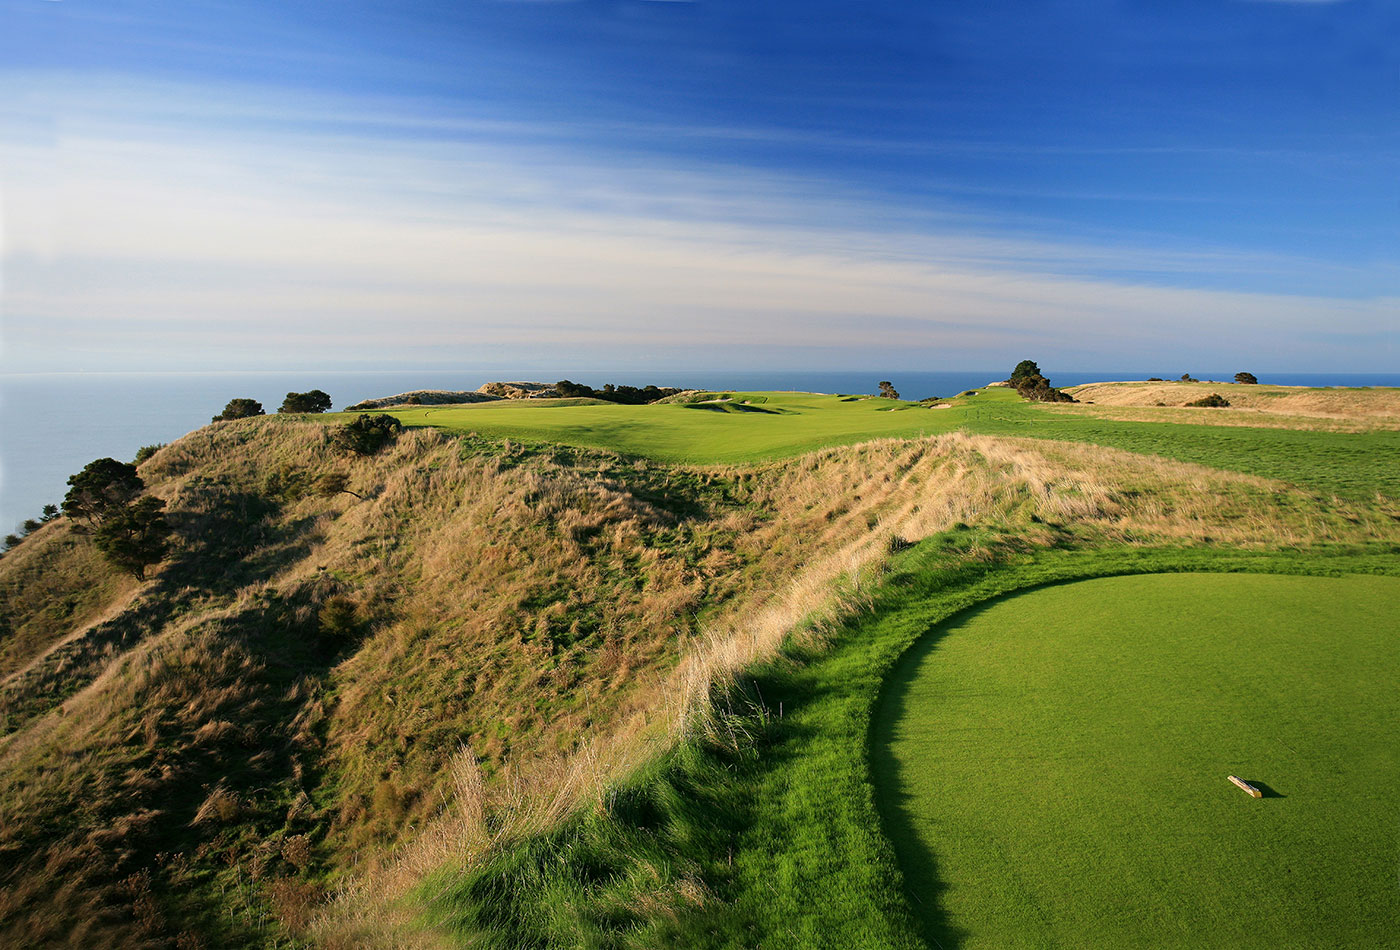 Visit Napier, New Zealand on our 2017 Australasia Golf Cruise and play Cape Kidnappers! [Photo by Gary Lisbon]